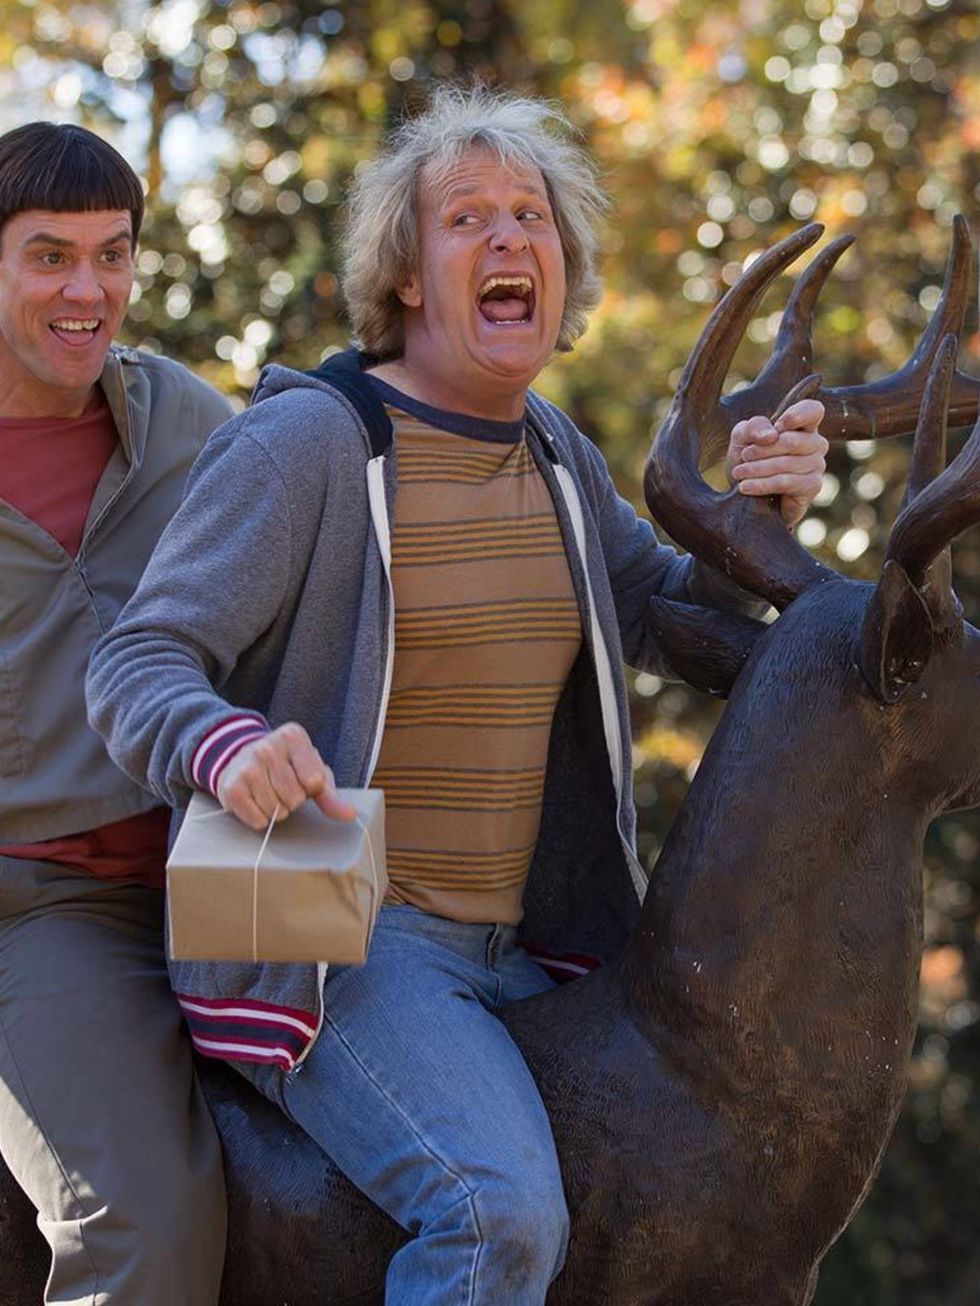 <p><strong>FILM: Dumb And Dumber To </strong></p>

<p>Out on Friday, the highly-anticipated sequel to the 1994 cult film, sees Jim Carrey and Jeff Daniels return as Lloyd and Harry. This installment sees the pair set out on a cross-country roadtrip in sea